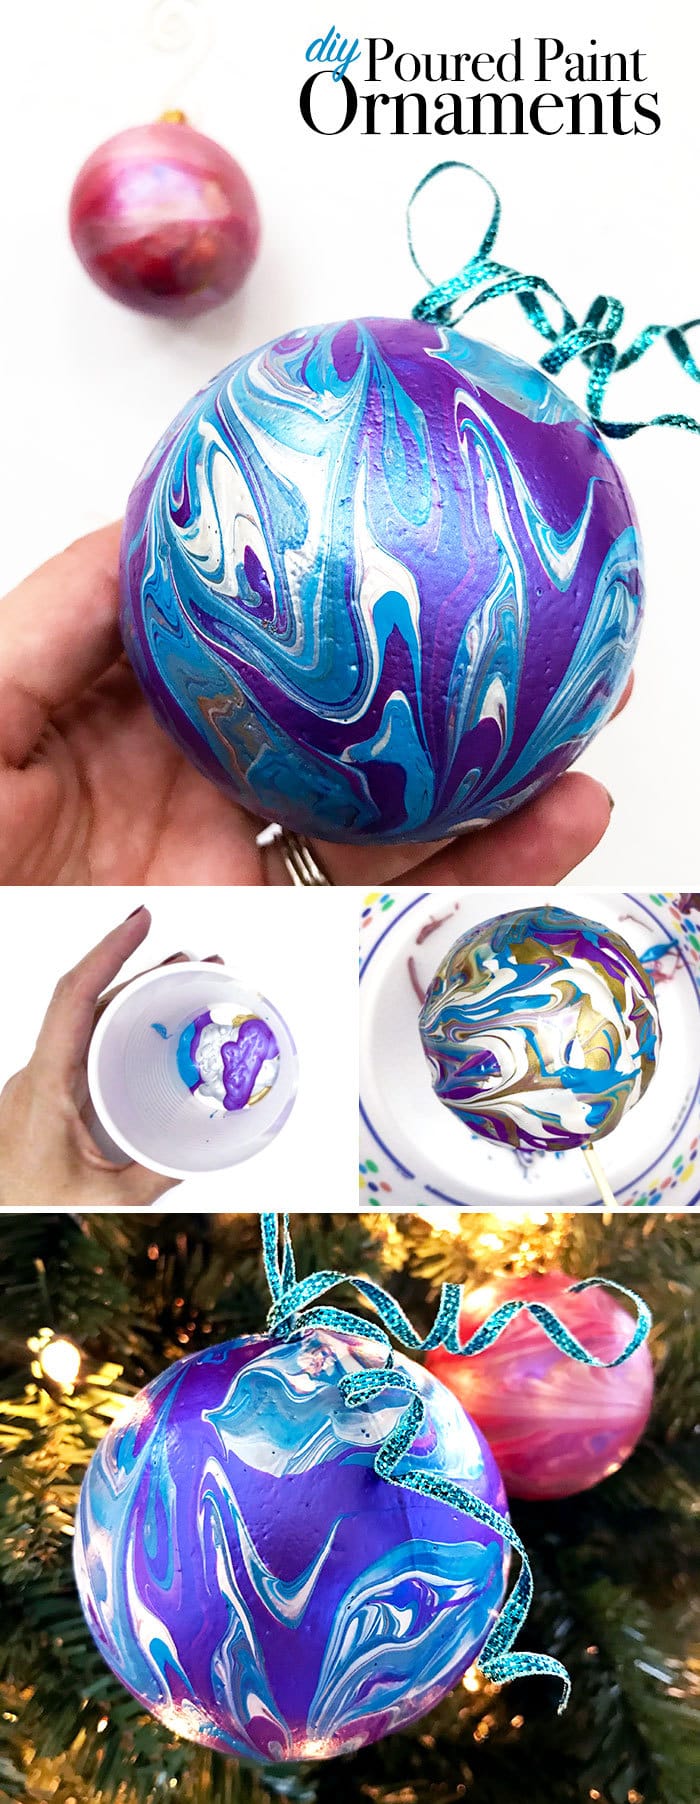 Make your own Poured paint ornaments - full tutorial by Jen Goode